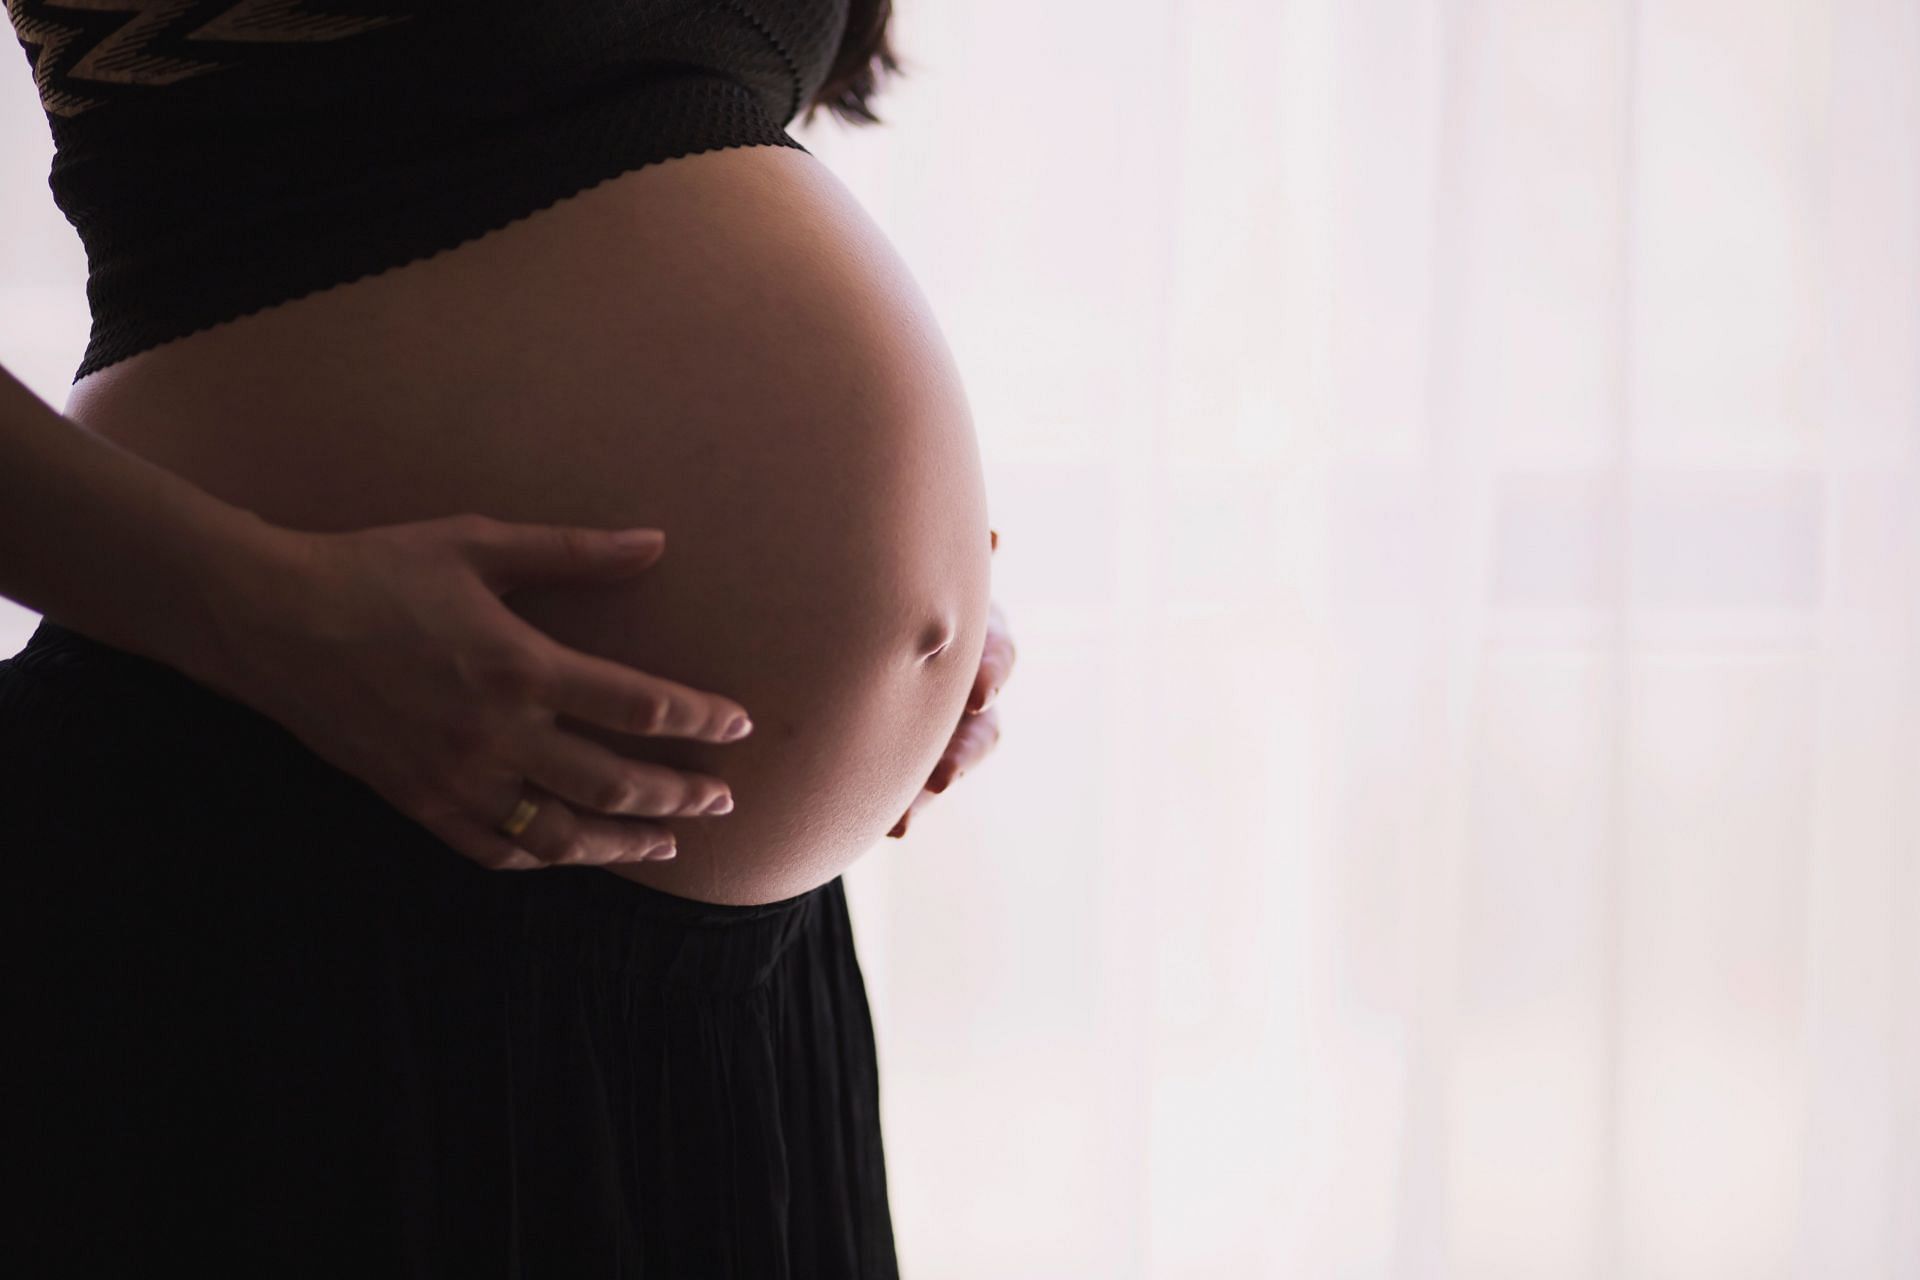 Women often have a strong sense of what is best for themselves and their bodies, especially during pregnancy. (Image via Unsplash/ Freestocks)